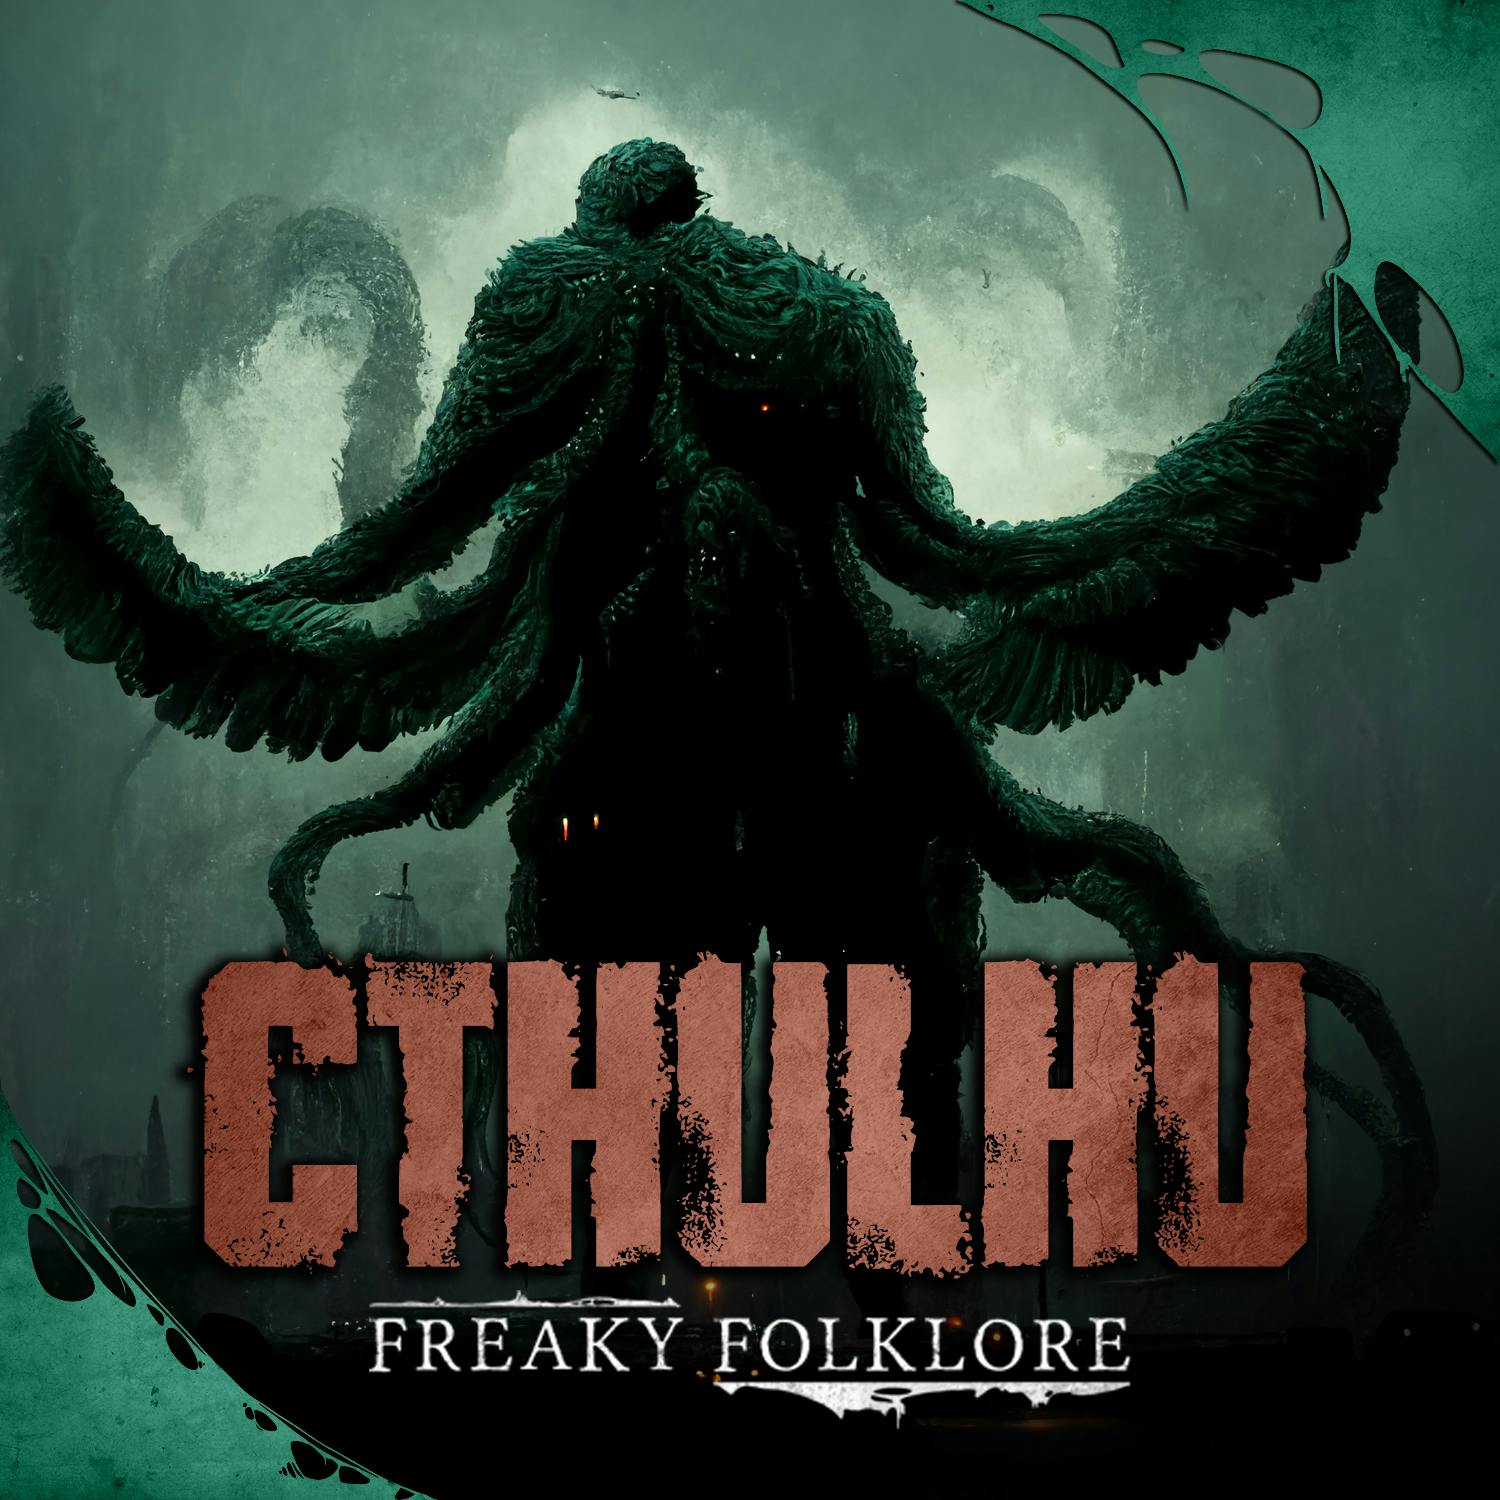 Cthulhu - The Great Old One